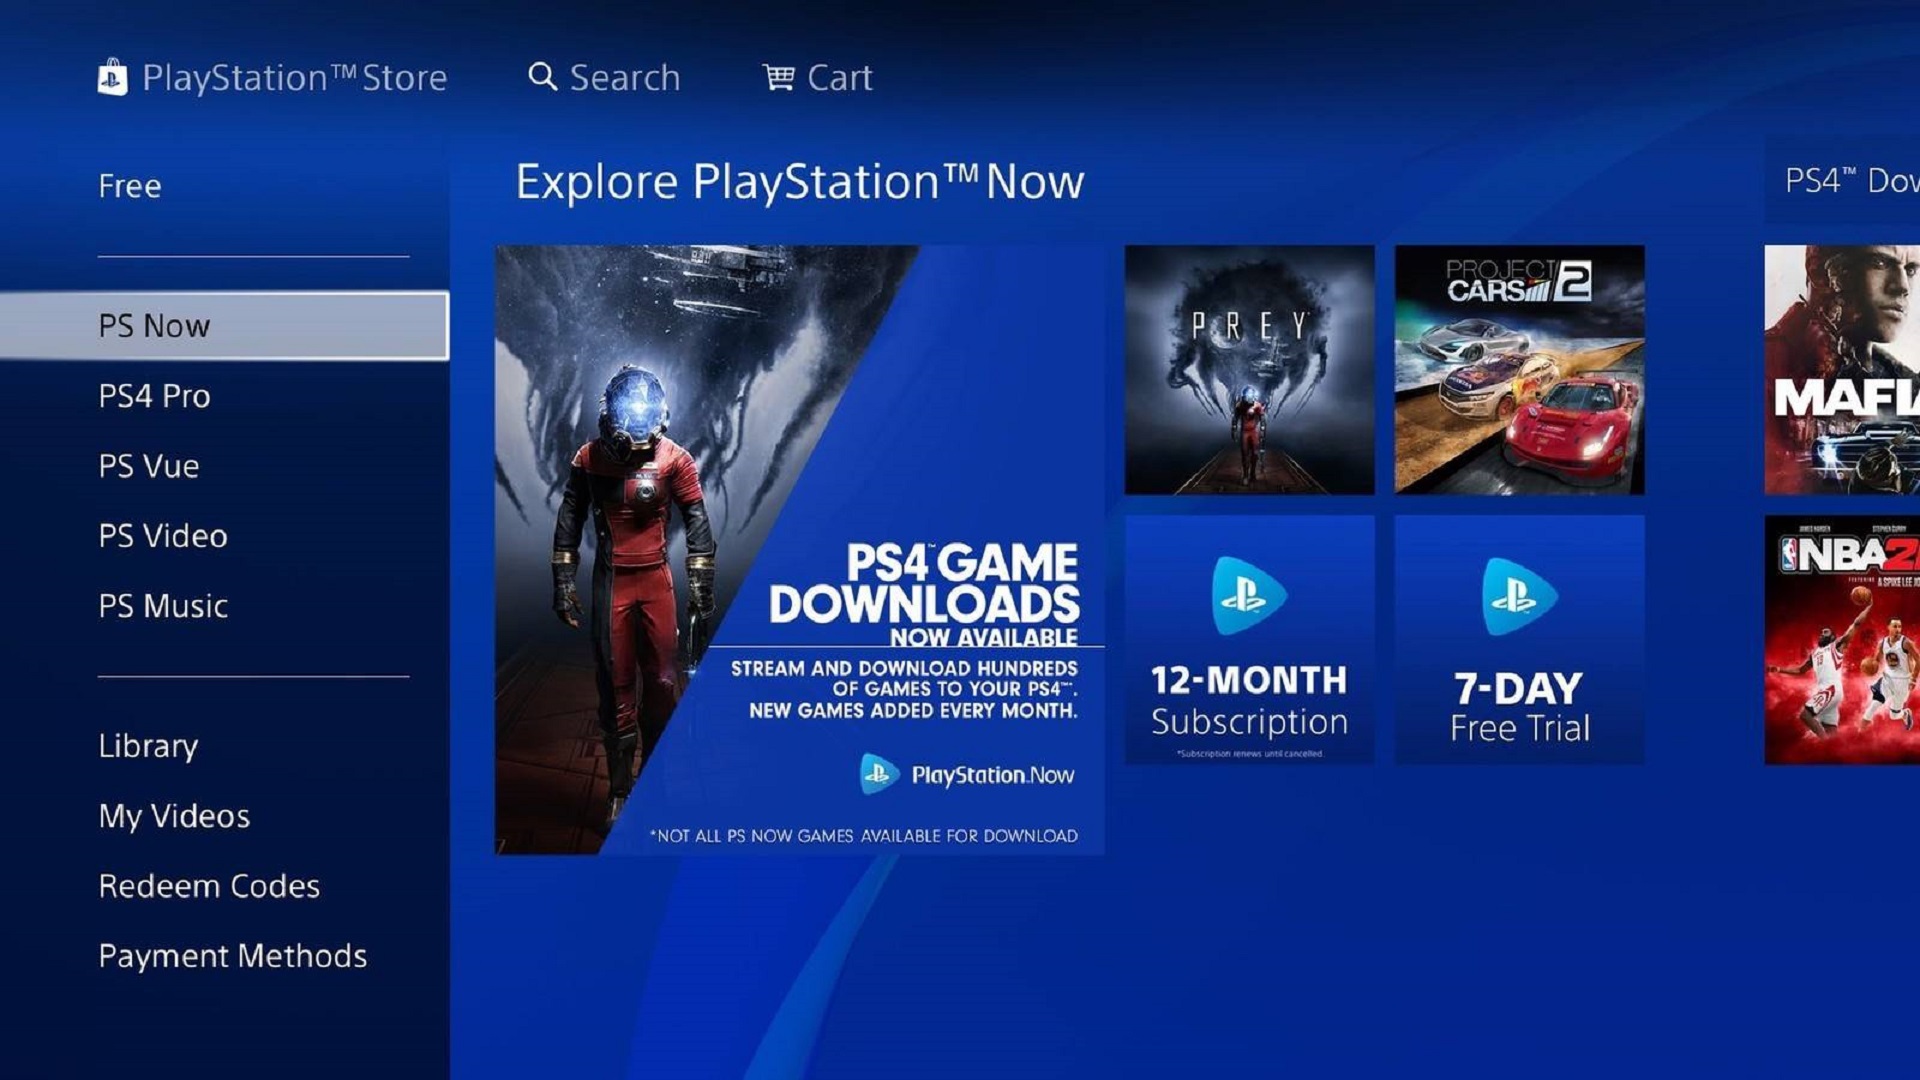 Now playstation PS Now